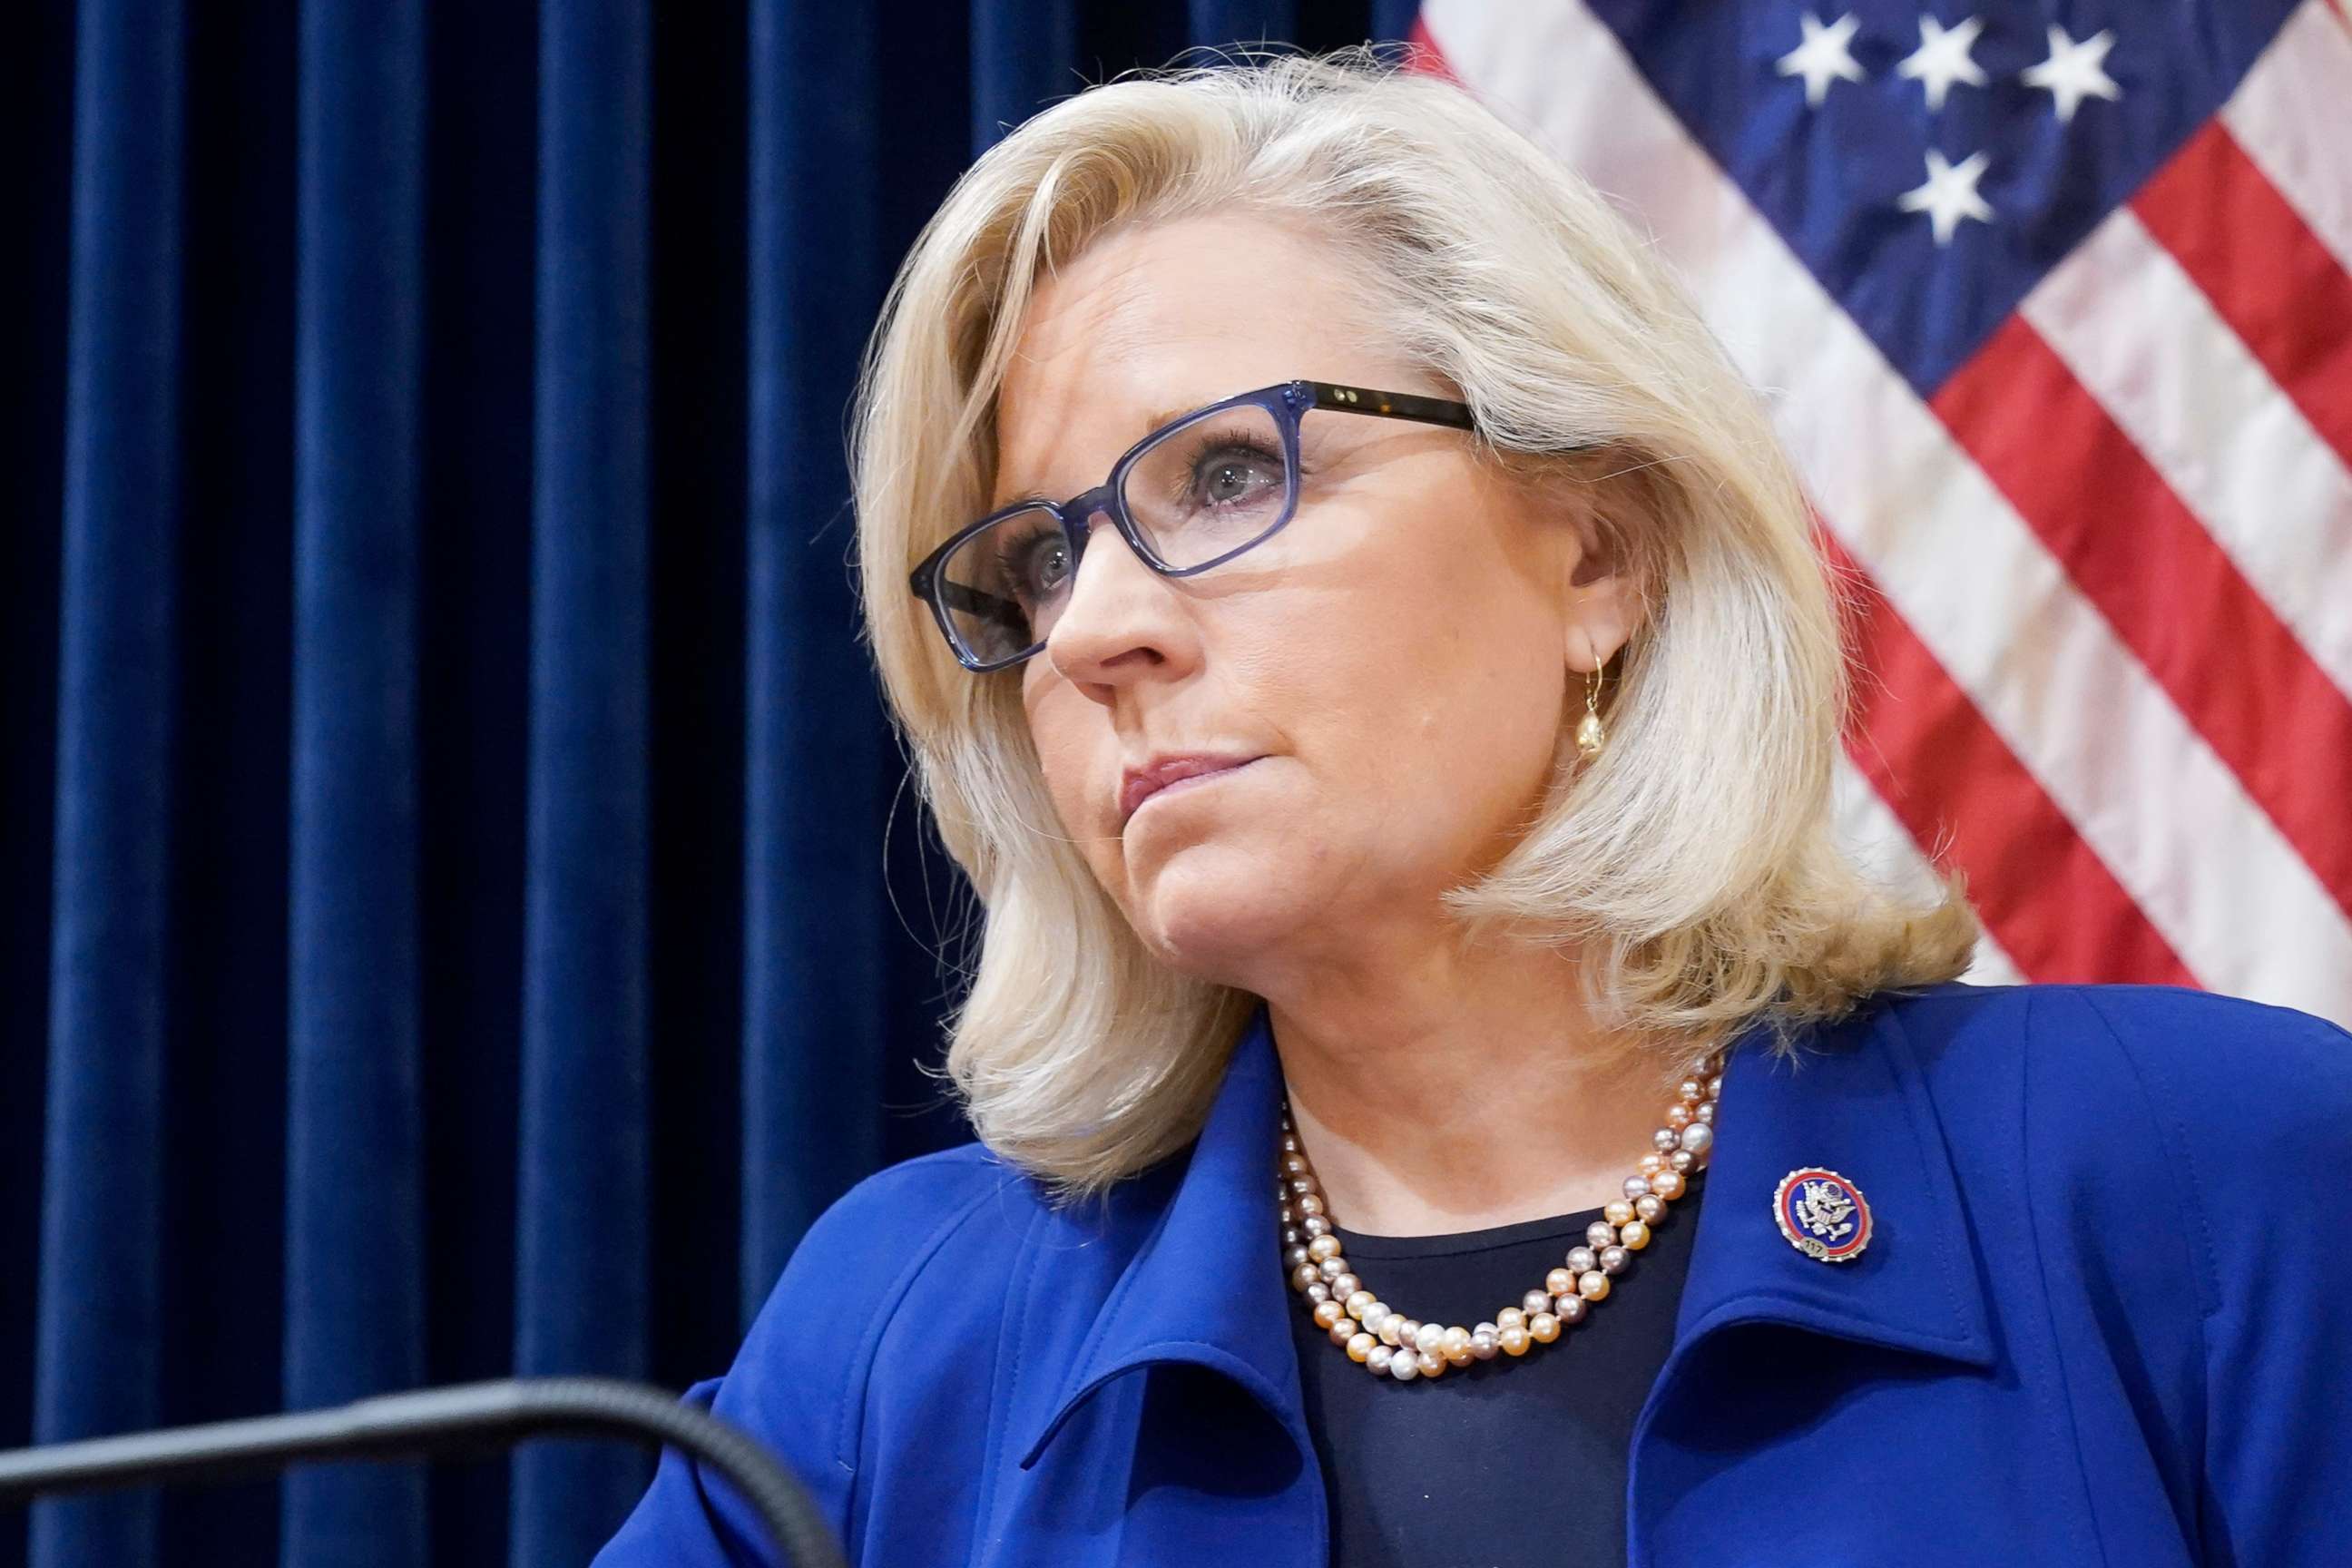 PHOTO: Rep. Liz Cheney listens during a hearing in Washington, July 27, 2021.